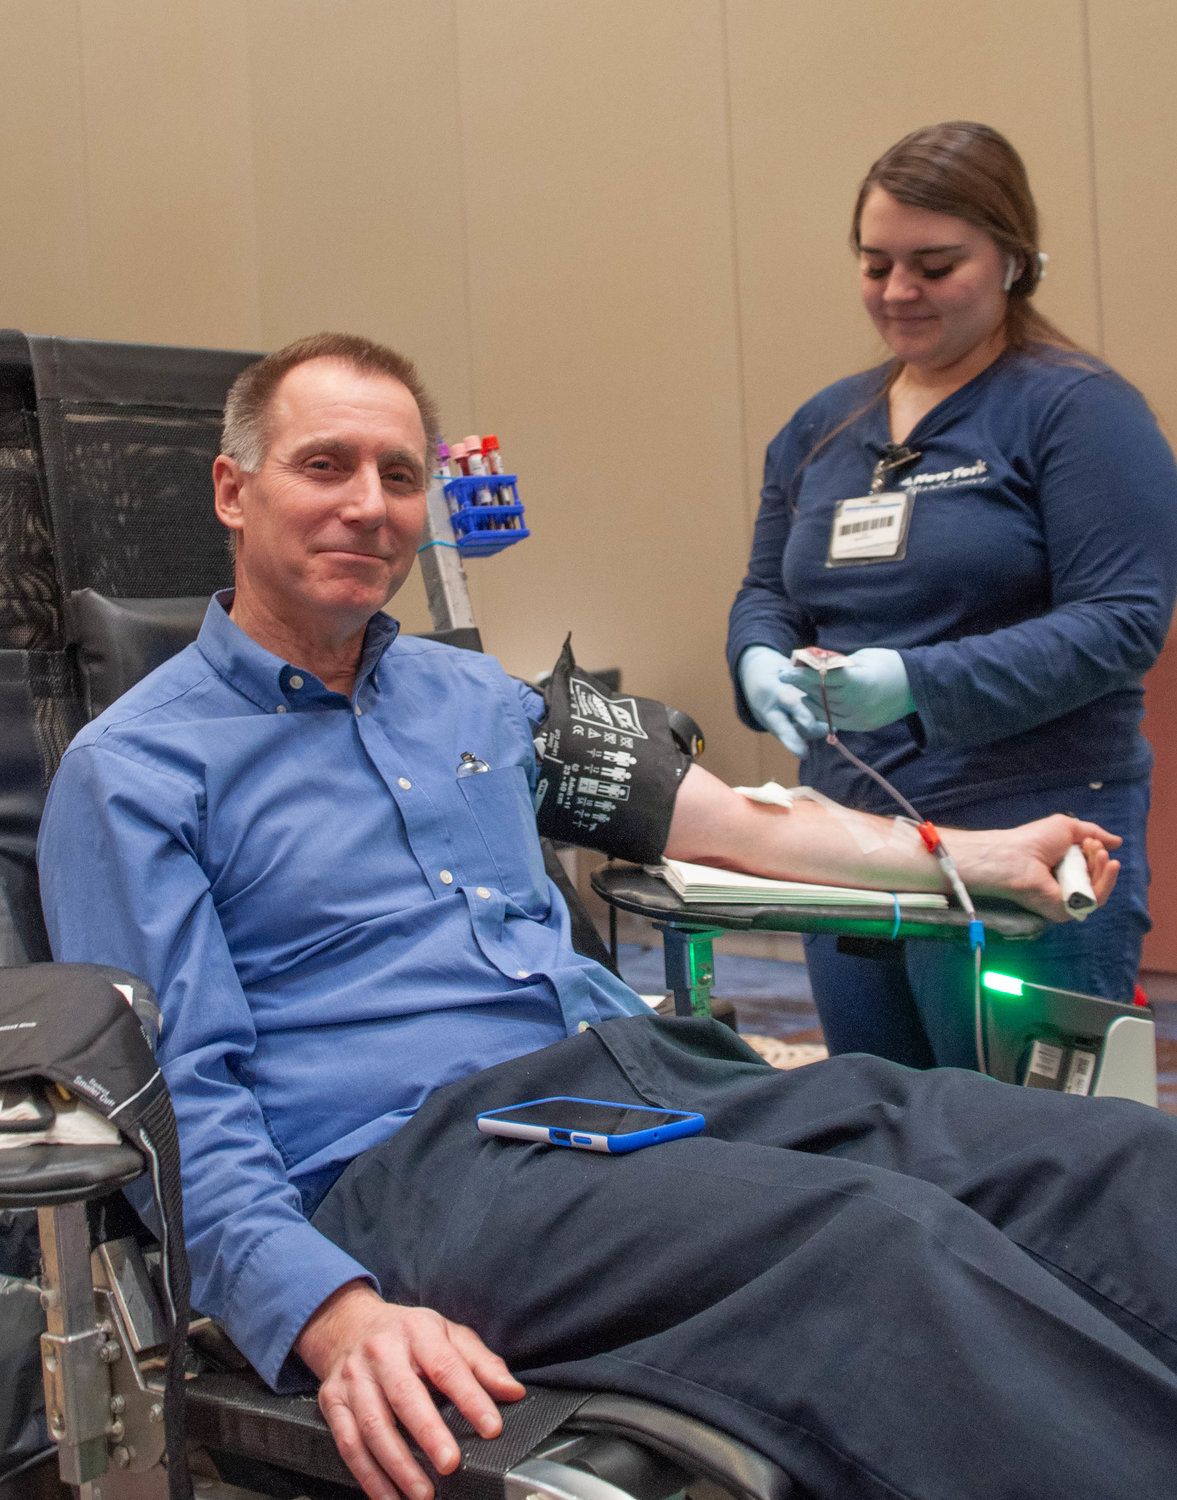 If one pic had to come out clear, I'm glad it was of Rotarian Gary Silverman donating blood at the 45th annual WSUL 98.3 Heart-A-Thon. The event was held at Resorts World Catskills last weekend. Apologies to literally everyone else.